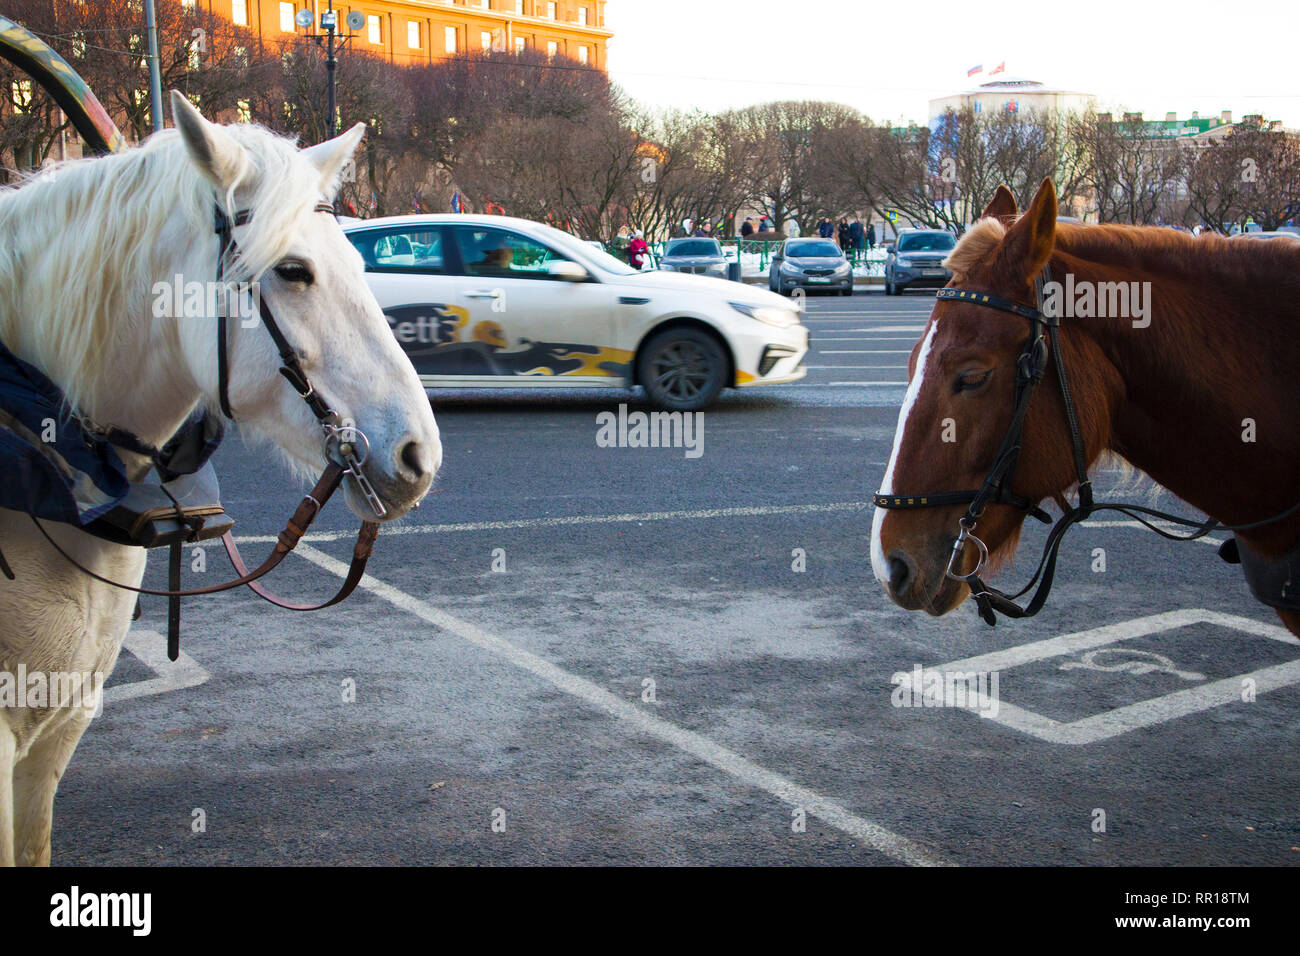 Two cute harnessed horses waiting for passengers for city walk in horse drawn carriage Stock Photo